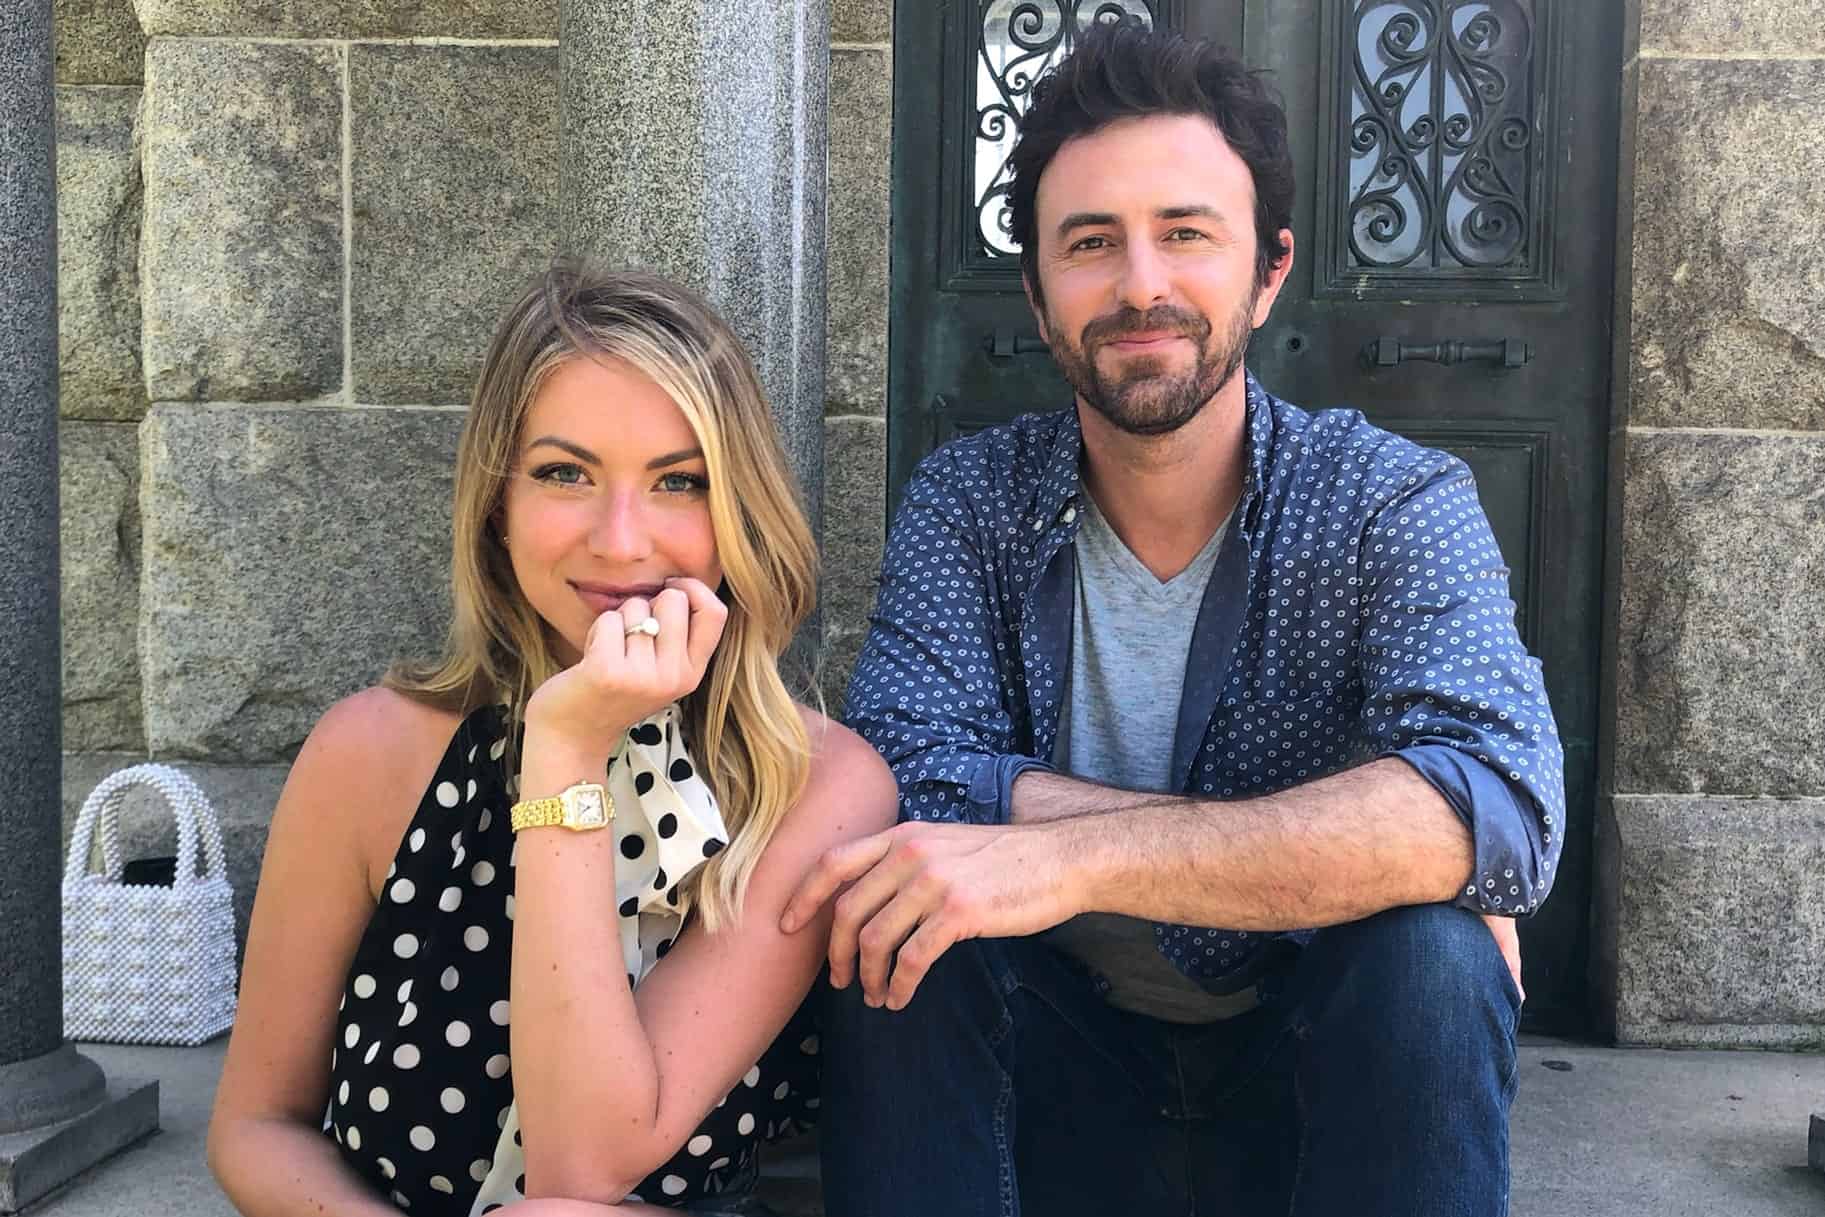 Stassi and Beau